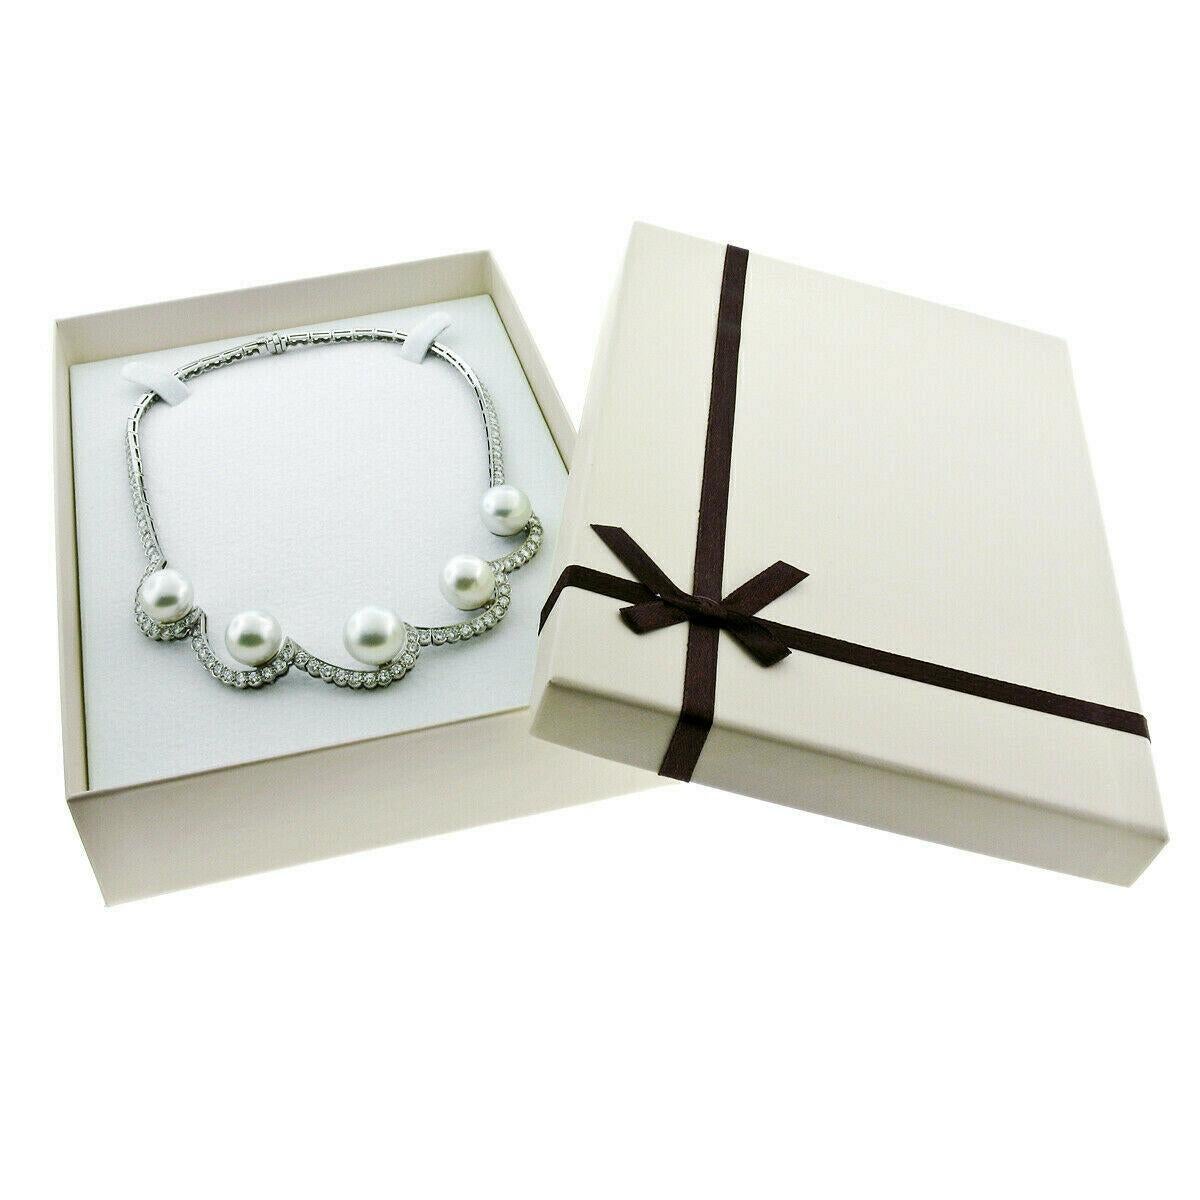 Platinum 10.25 Carat Diamond and Floating South Sea Pearl Statement Necklace In Excellent Condition For Sale In Montclair, NJ